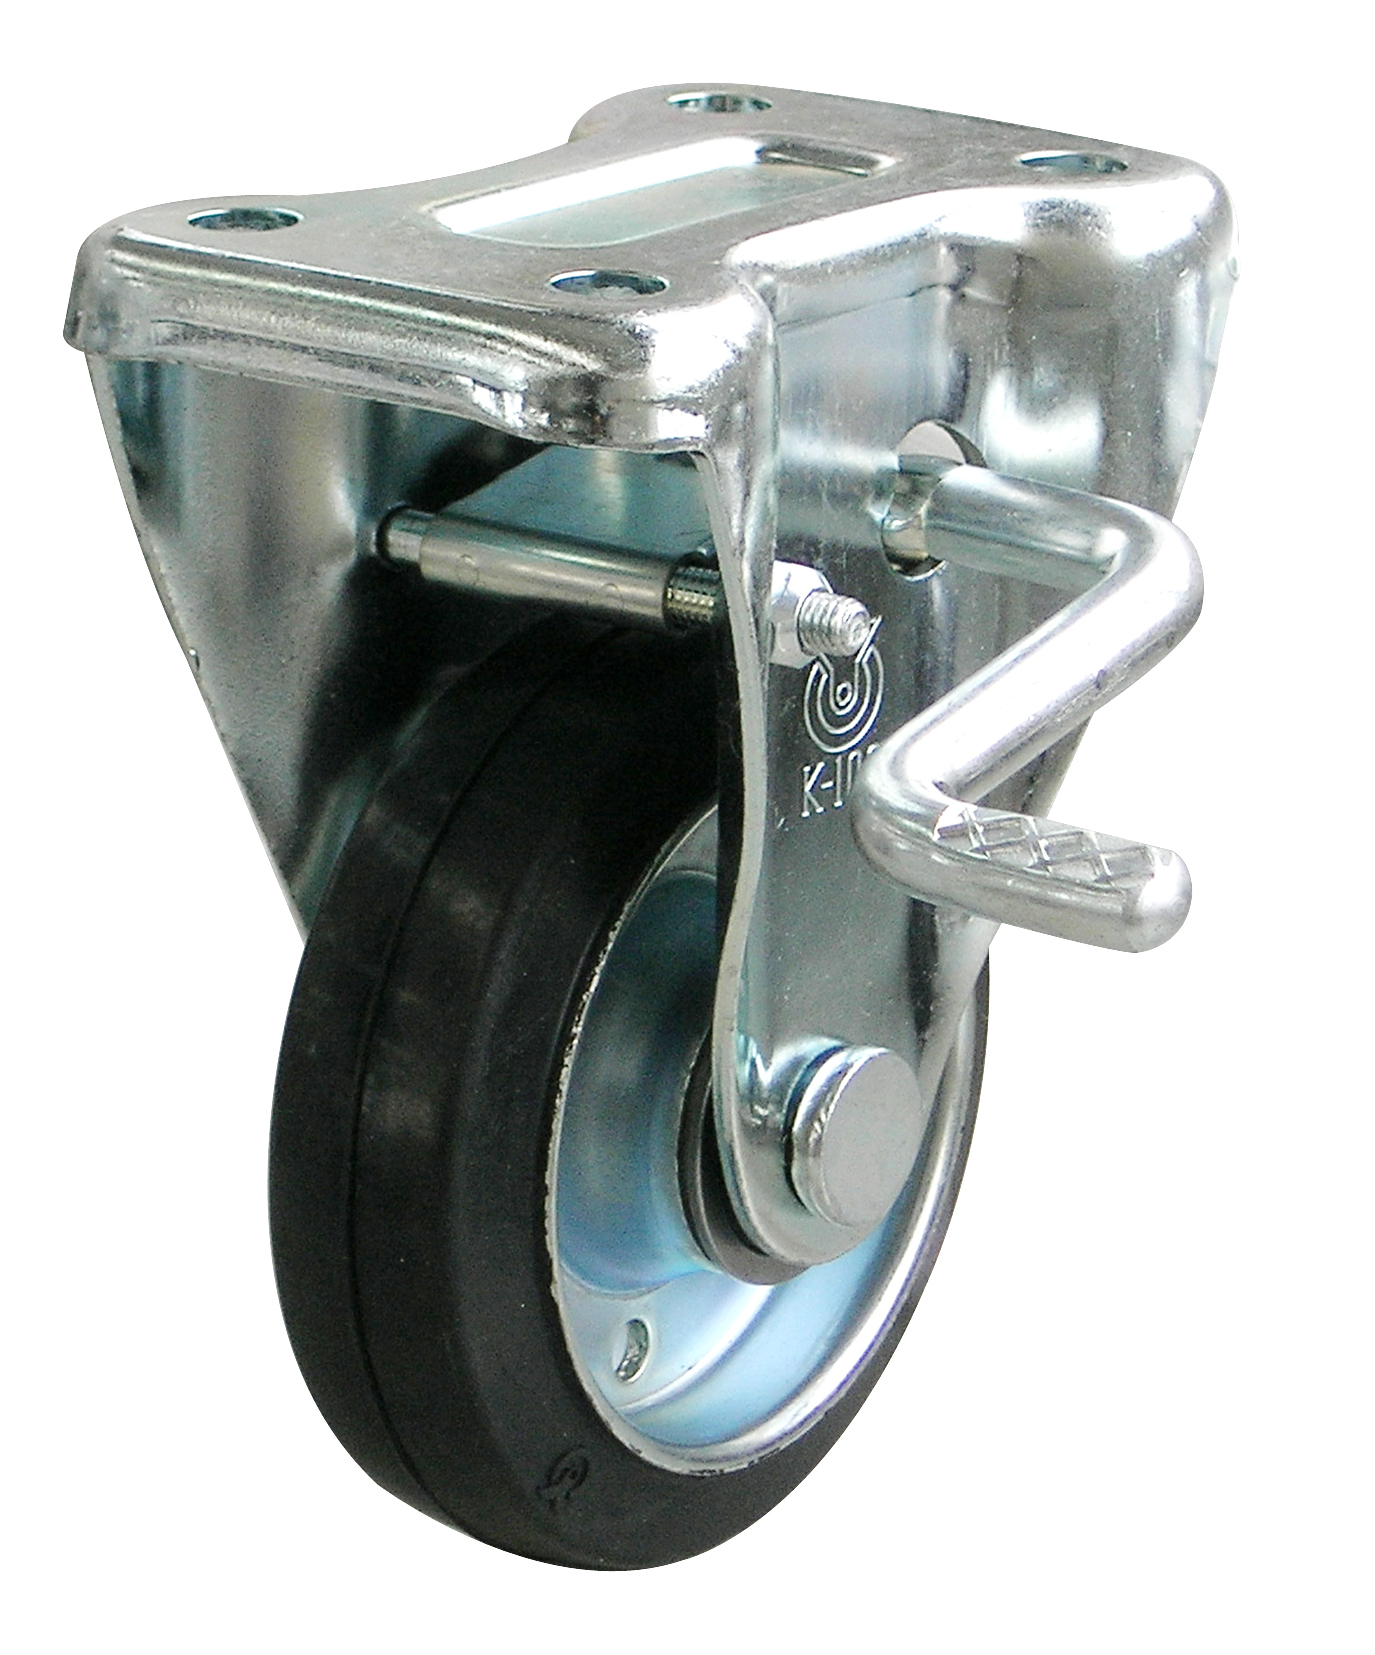 Casters - Fixed plate, with rotation stop, KB series.